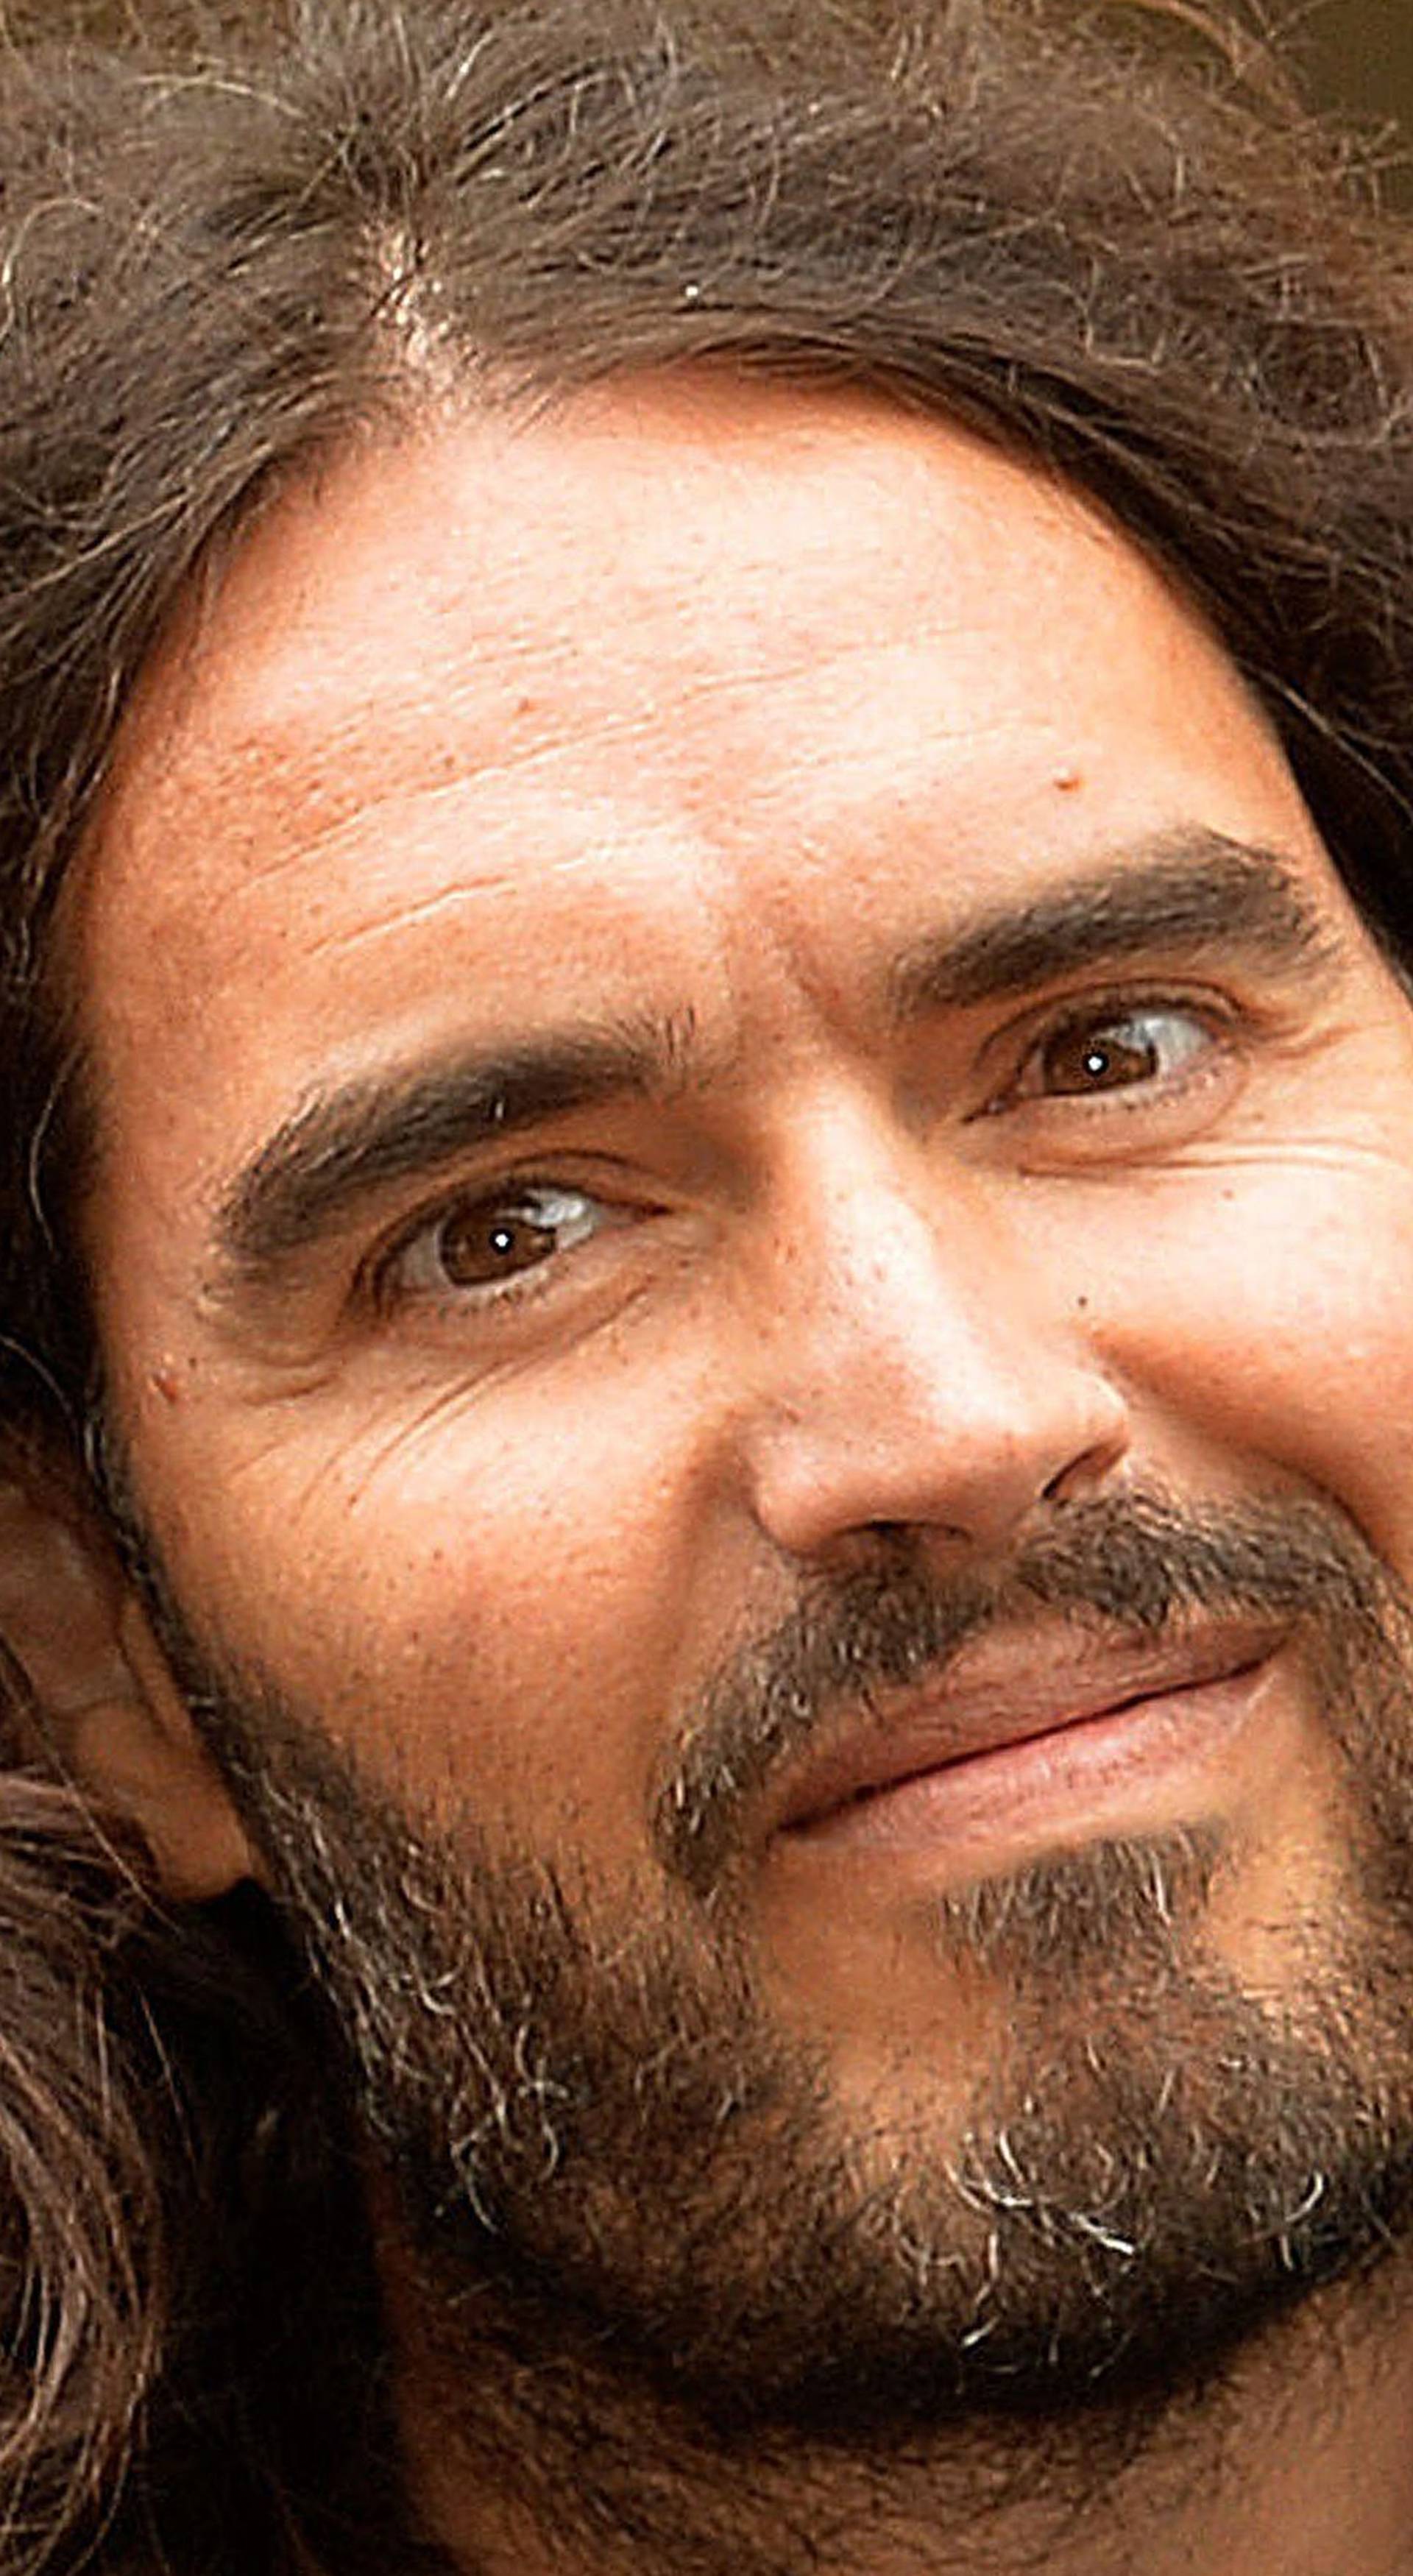 Russell Brand allegations